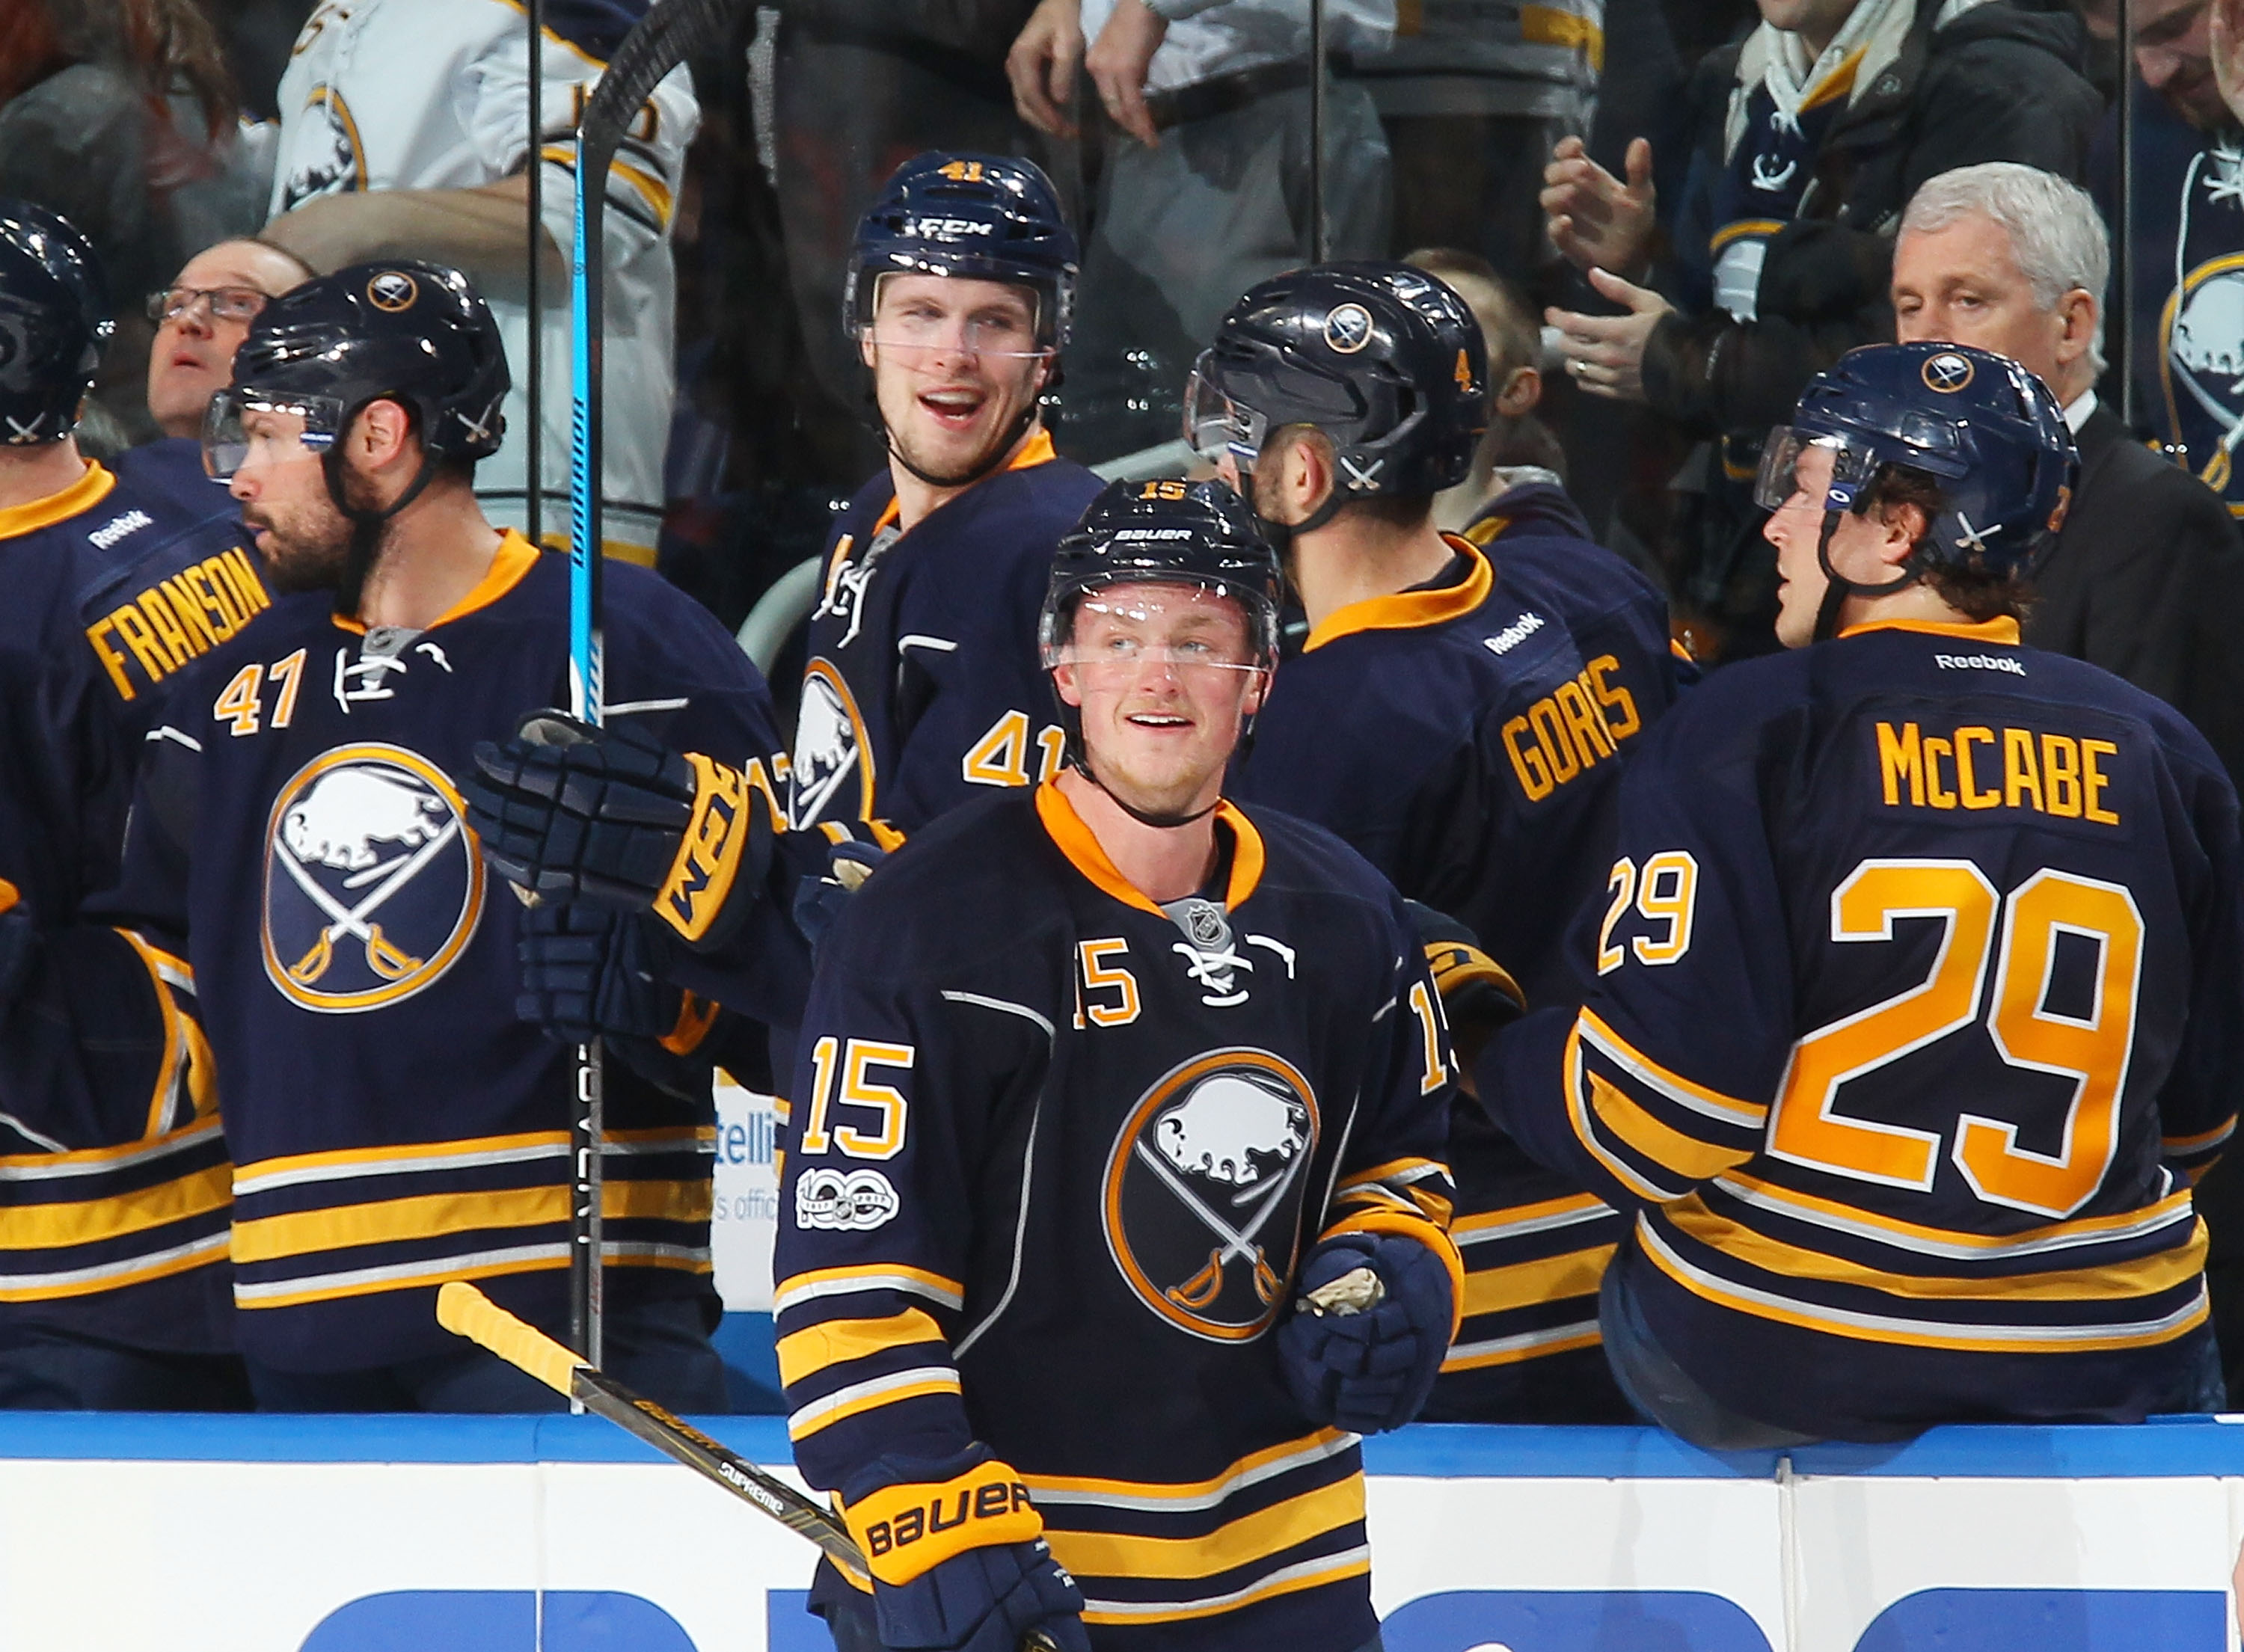 BUFFALO, NY - MARCH 07: Jack Eichel #15 of the Buffalo Sabres celebrates his second period goal against the Philadelphia Flyers during an NHL game at the KeyBank Center on March 7, 2017 in Buffalo, New York.  (Photo by Bill Wippert/NHLI via Getty Images)